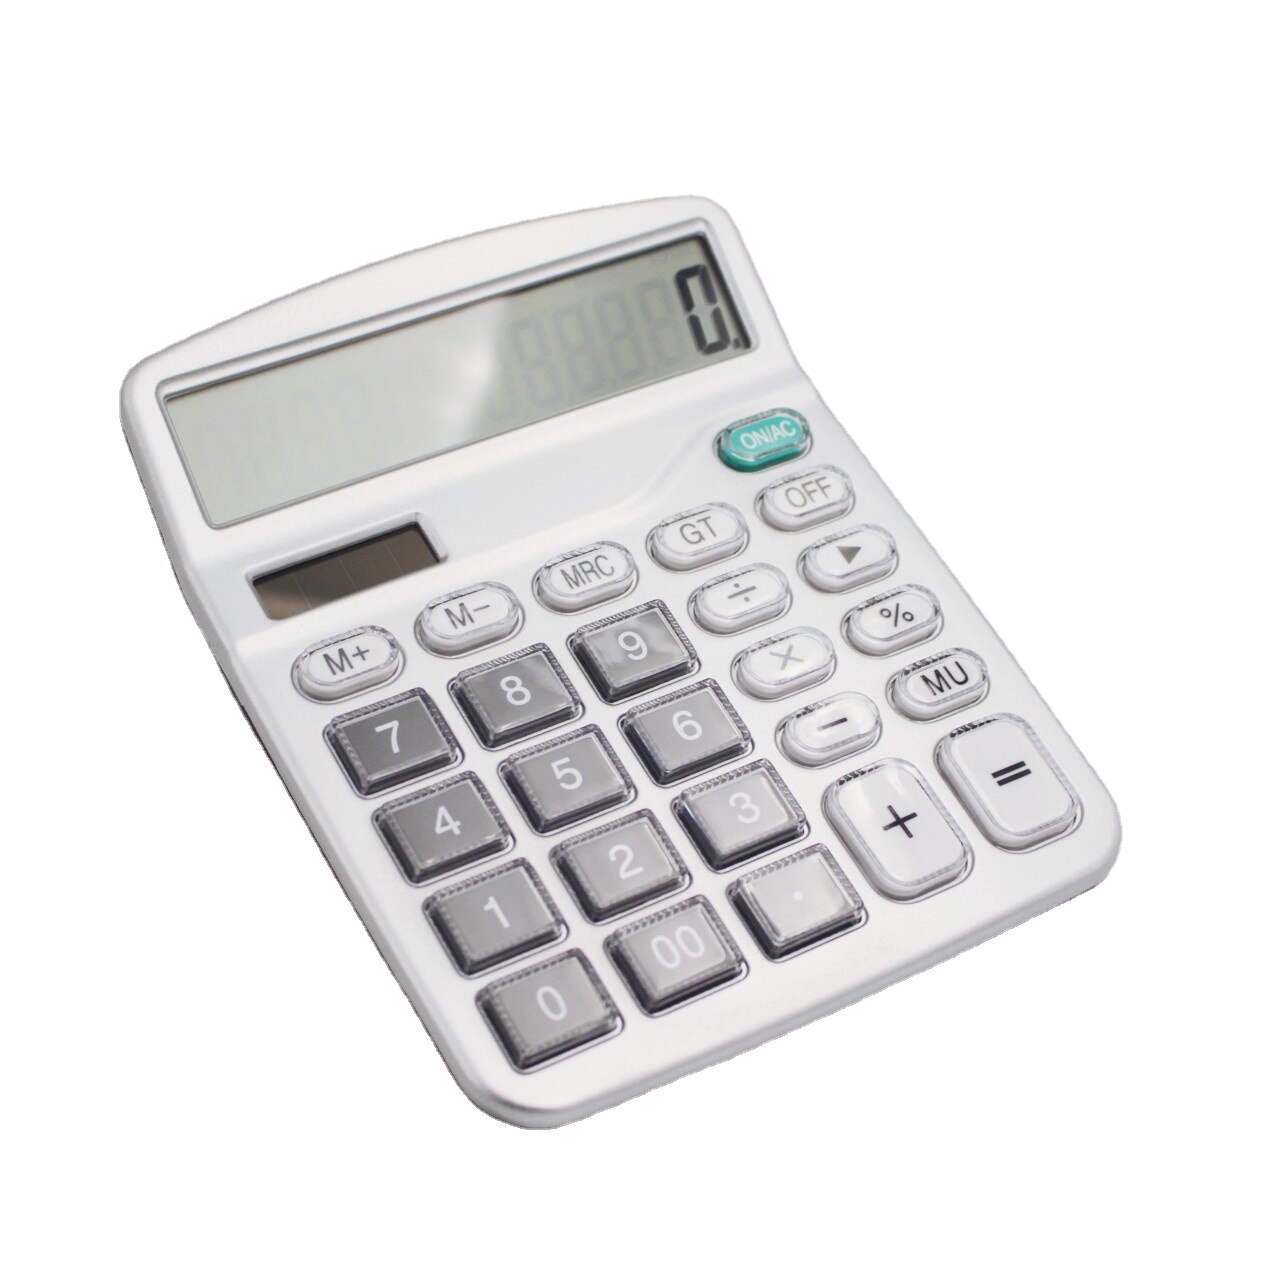 12Digit Desk Calculator Large Buttons Financial Business Accounting Tool Silver Big Key Battery Solar Power for School Office